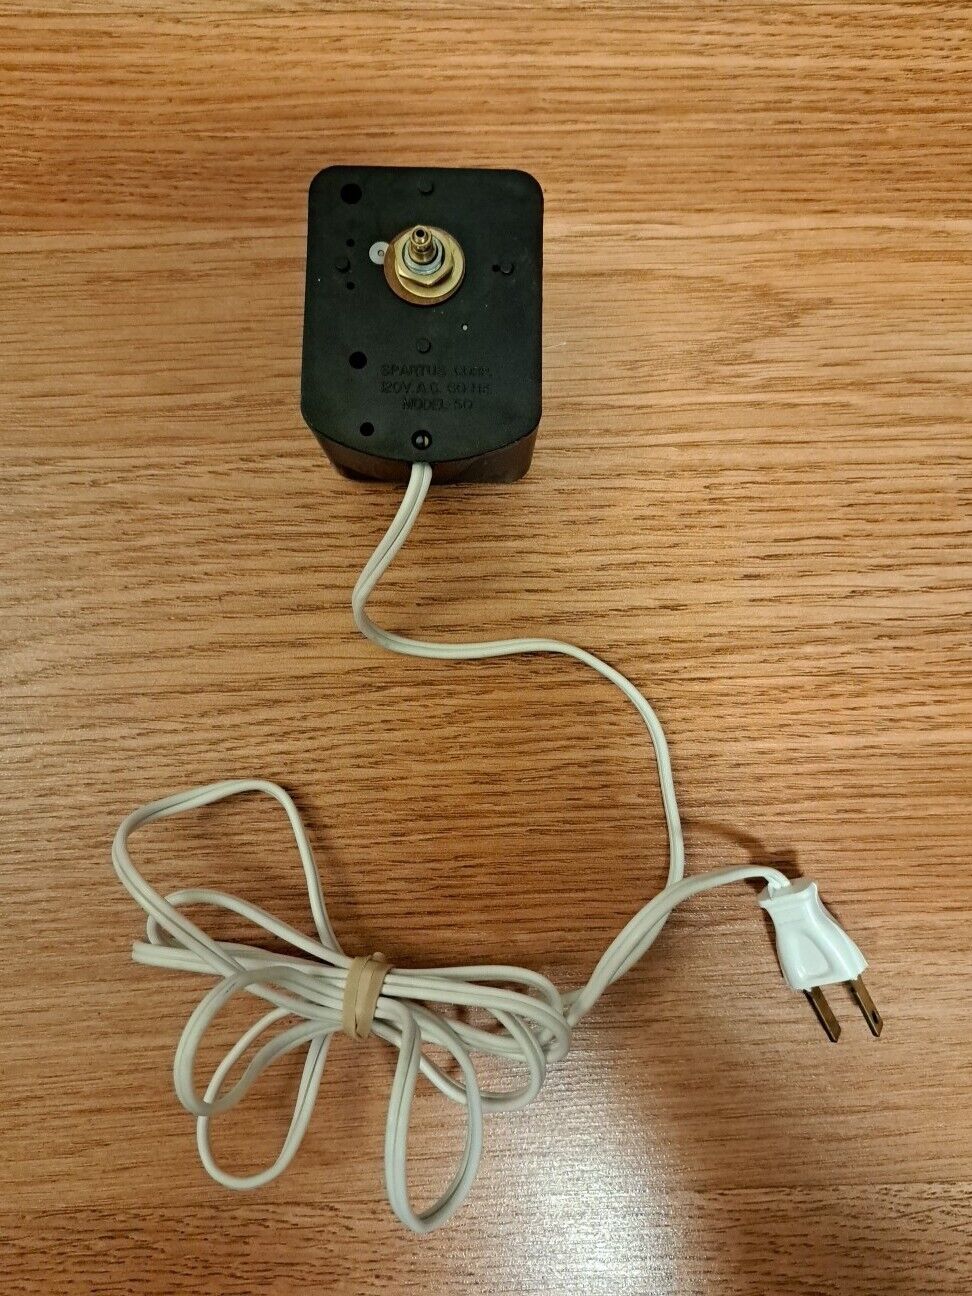 Spartus Electric Clock Motor-New, Comes With Mounting Hardware 